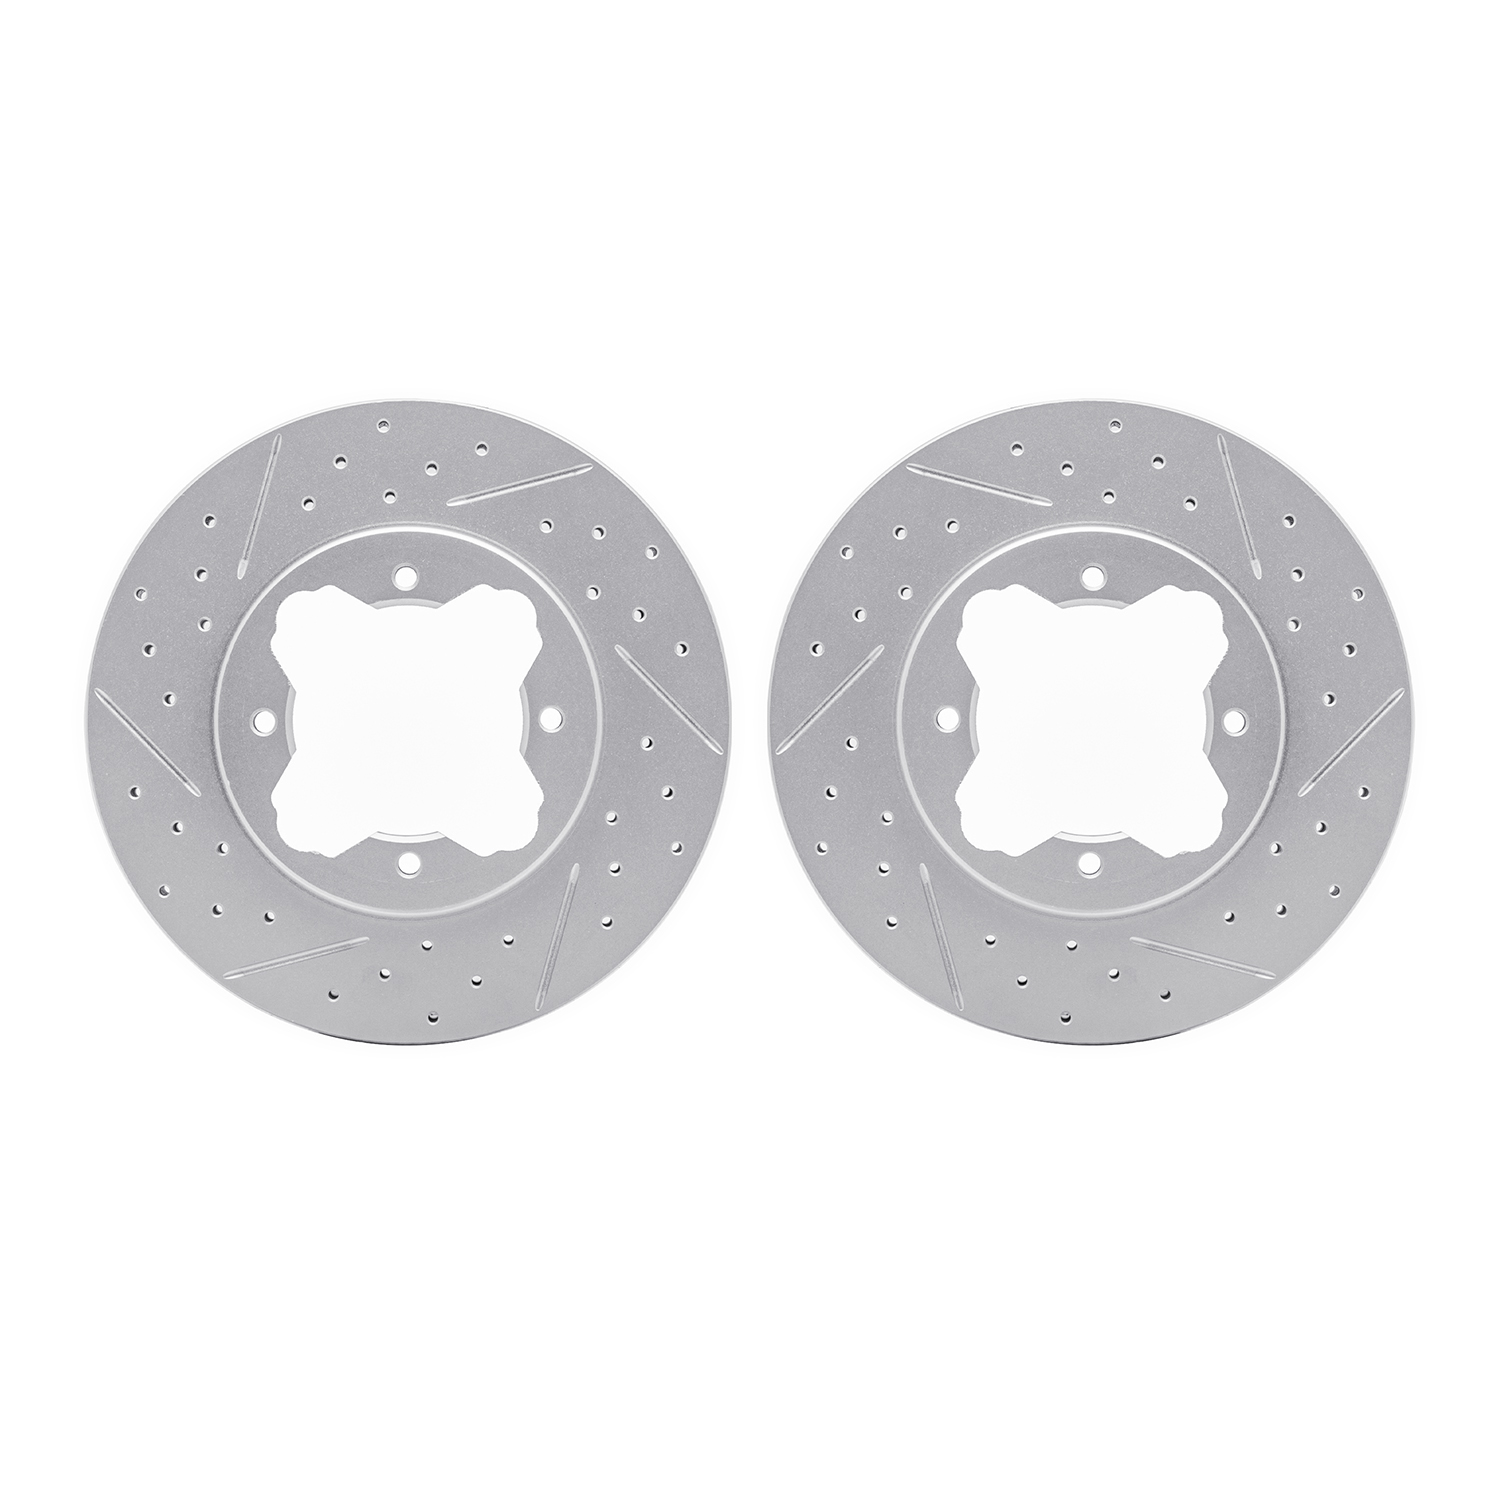 2002-59000 Geoperformance Drilled/Slotted Brake Rotors, 1990-1997 Acura/Honda, Position: Front